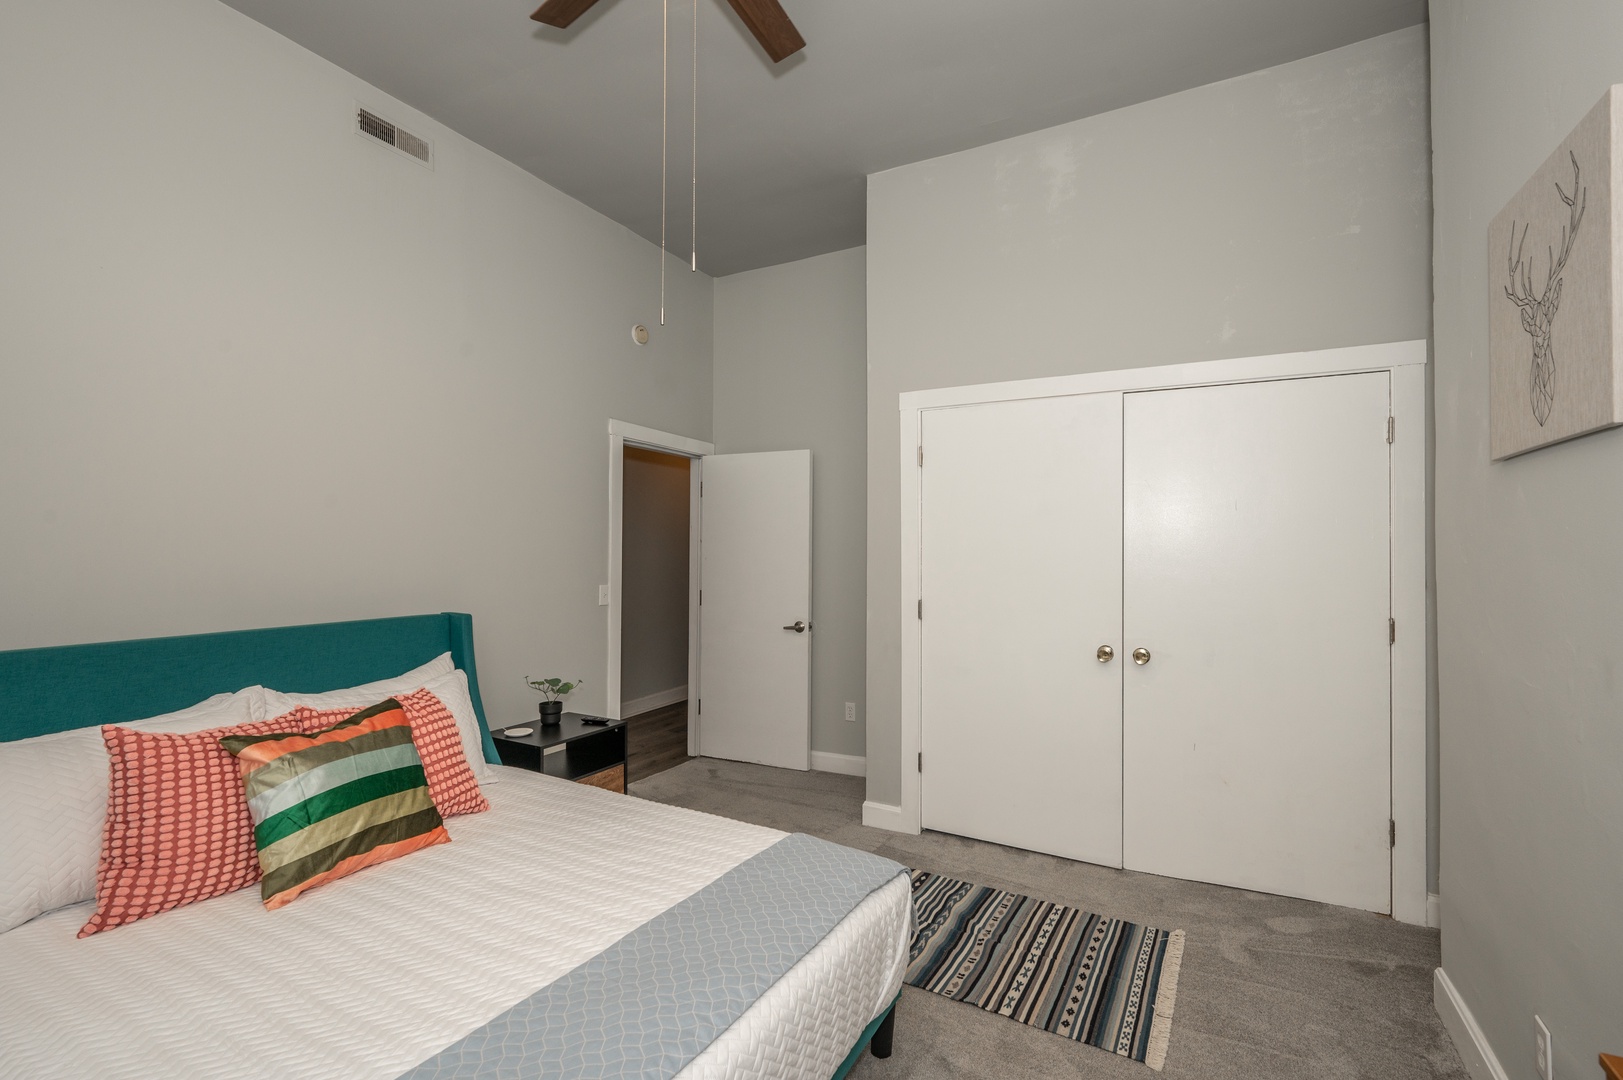 Unit 2: The 2nd of 2 queen bedrooms offers a Smart TV & ceiling fan